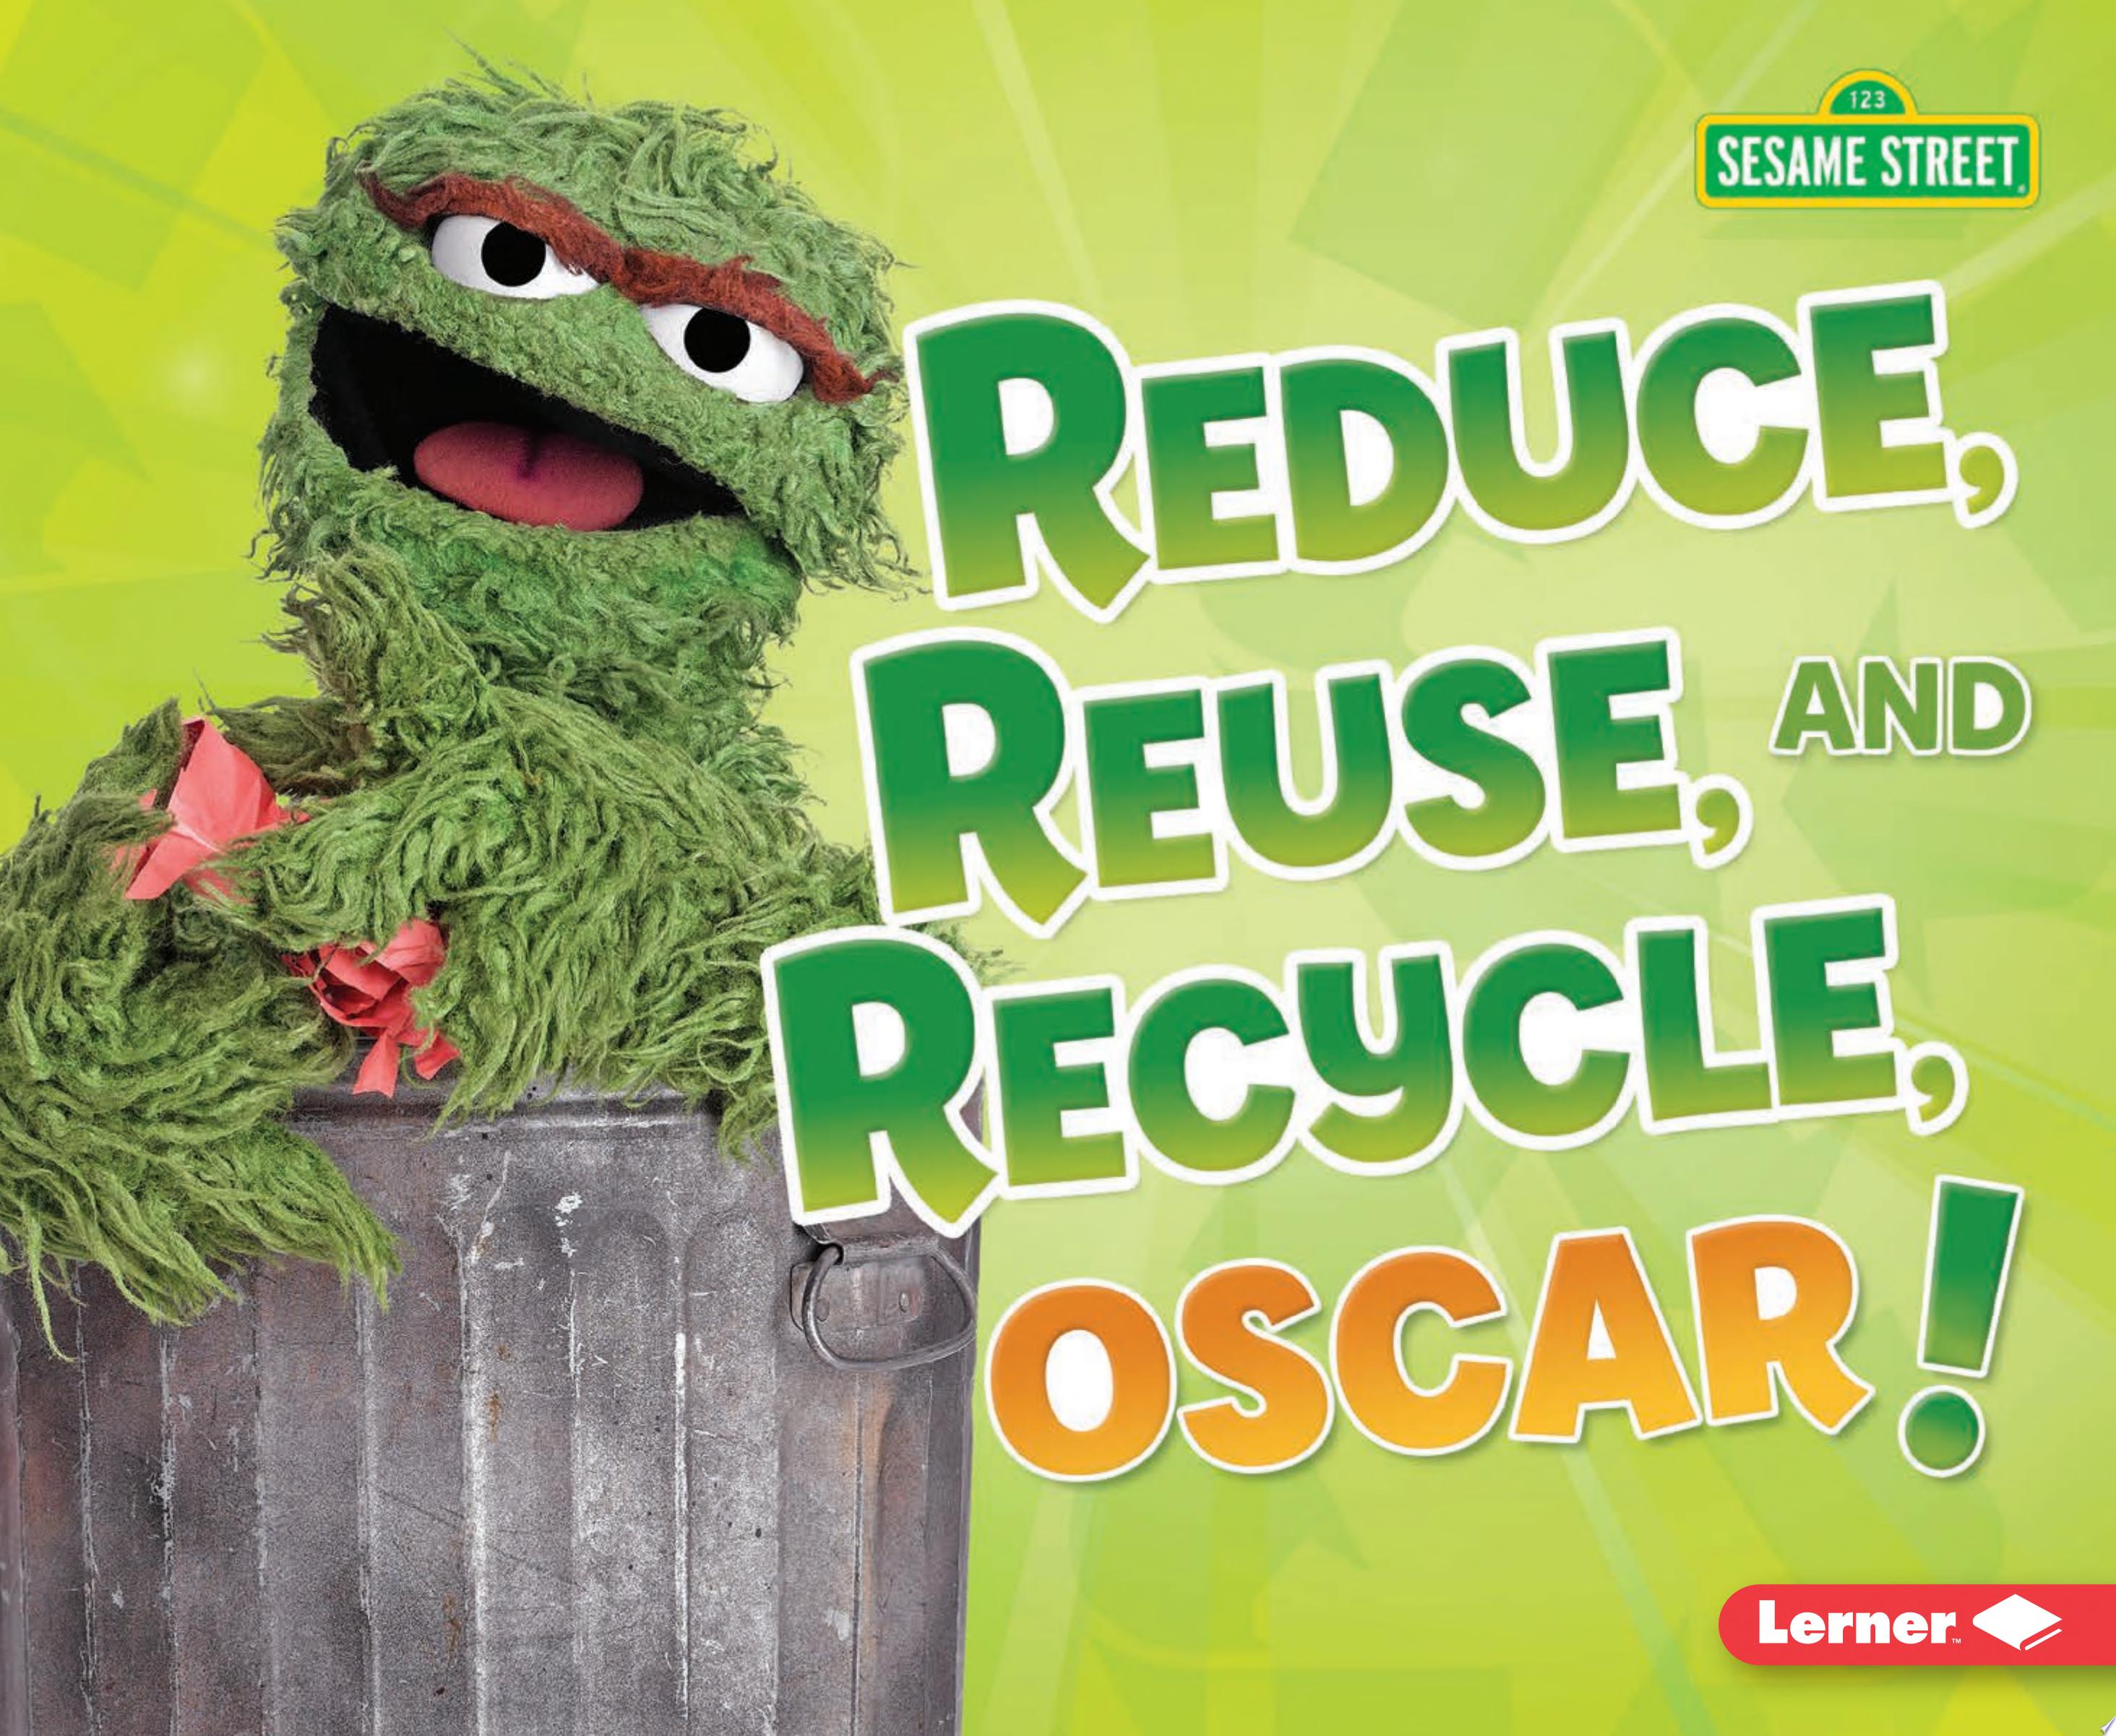 Image for "Reduce, Reuse, and Recycle, Oscar!"